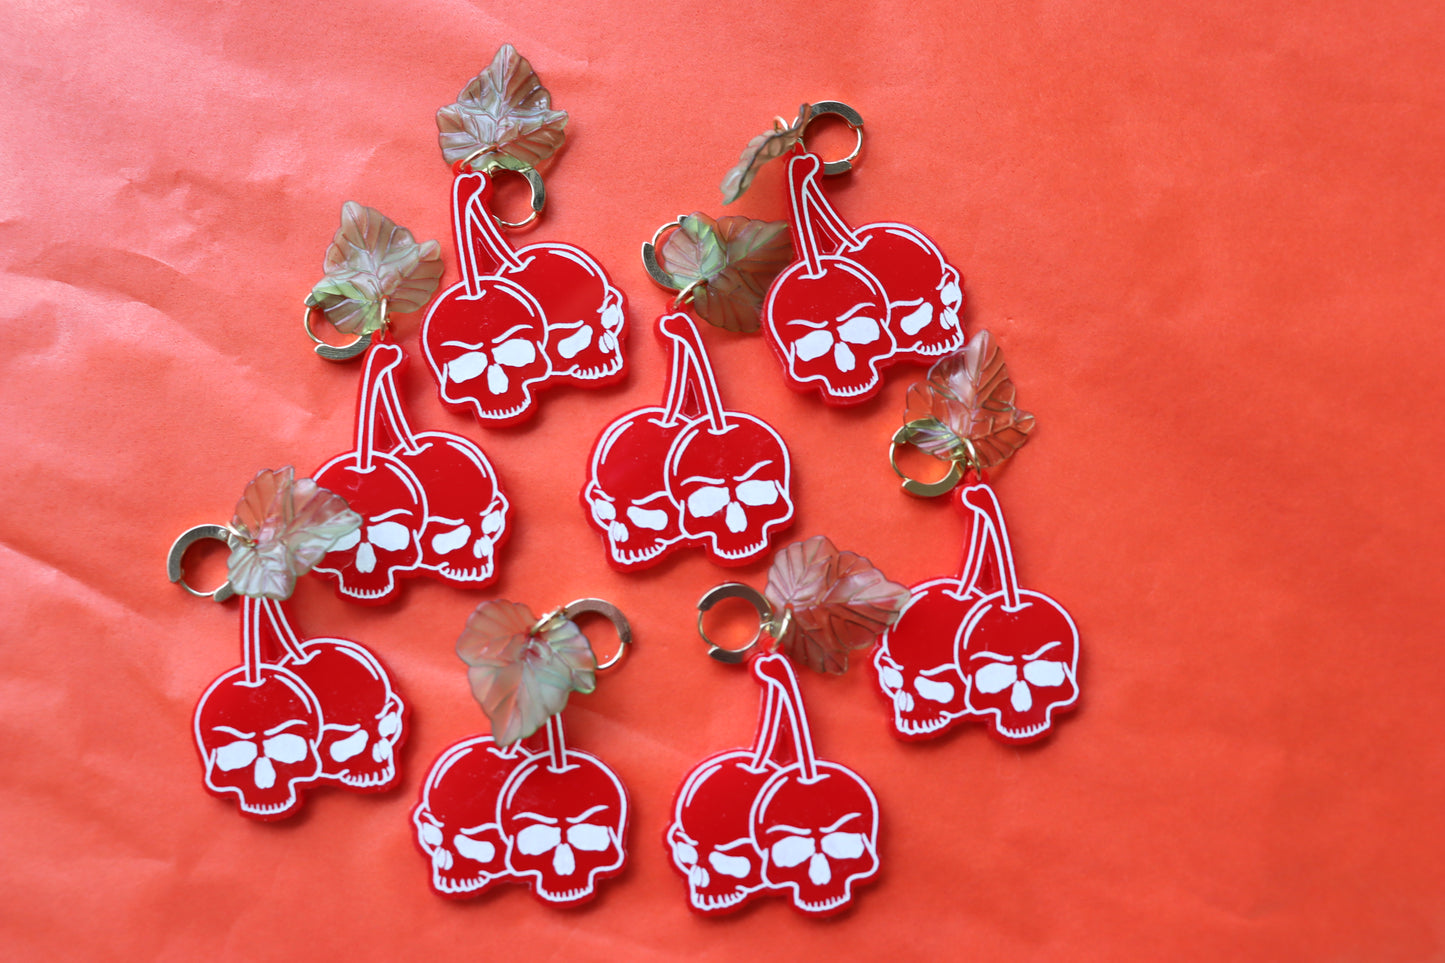 "Dying to Have Fun" Cherry Skeleton Earrings